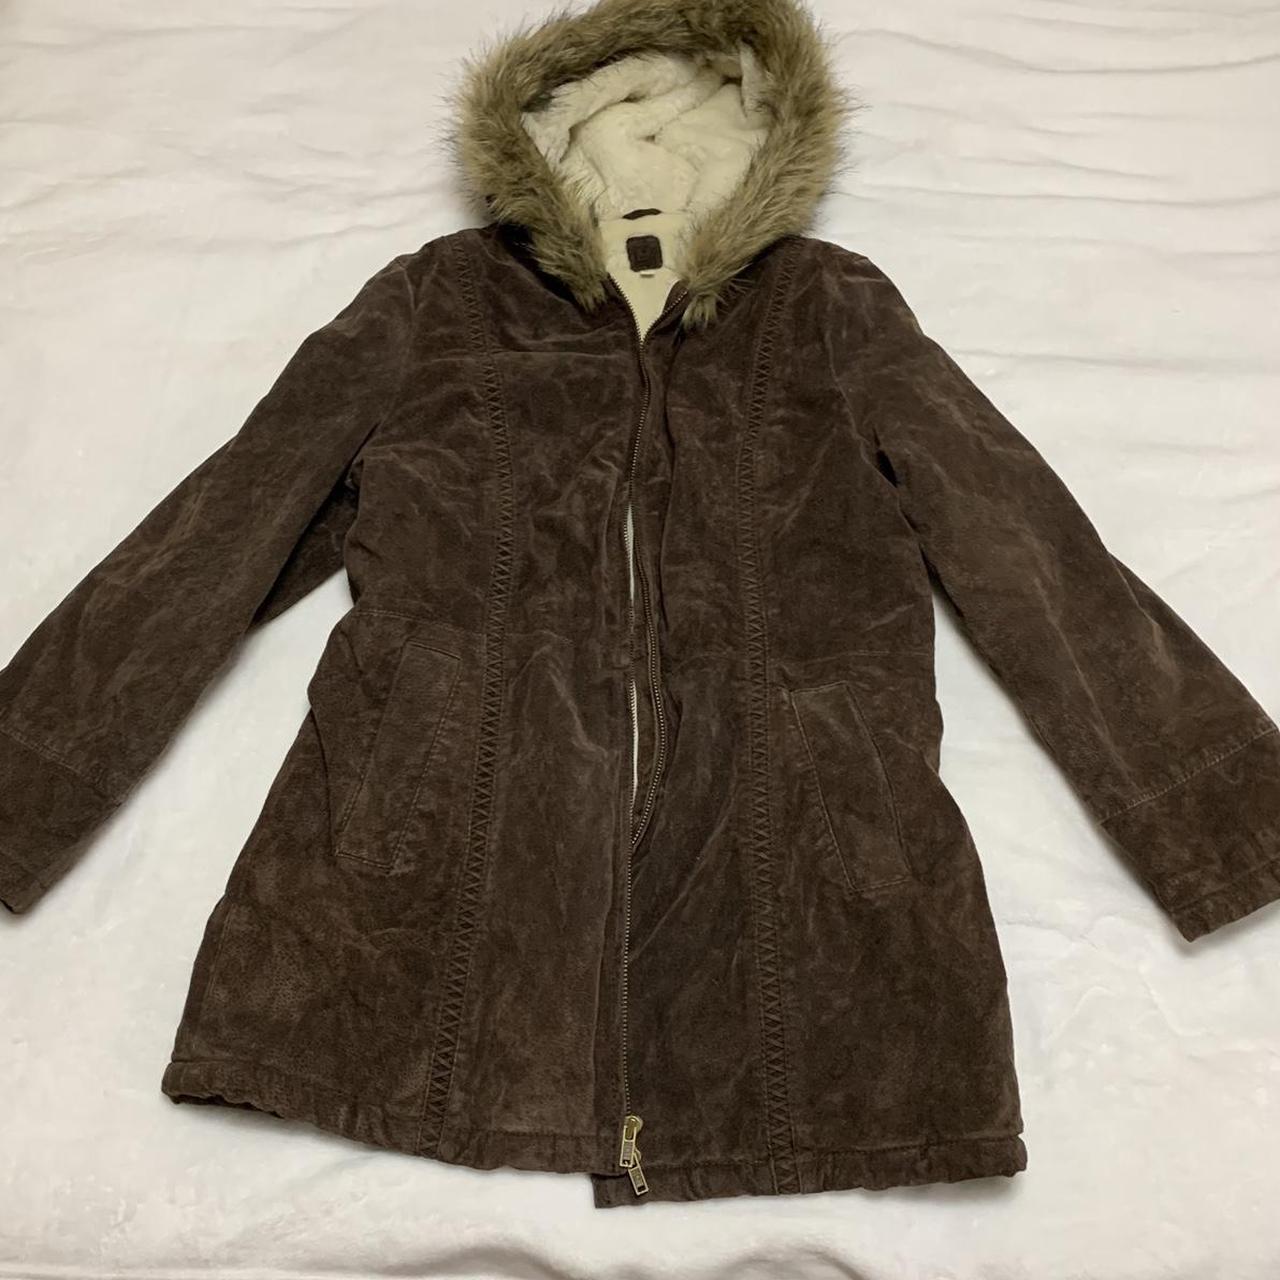 Product Image 1 - Vintage suede faux fur jacket

-from